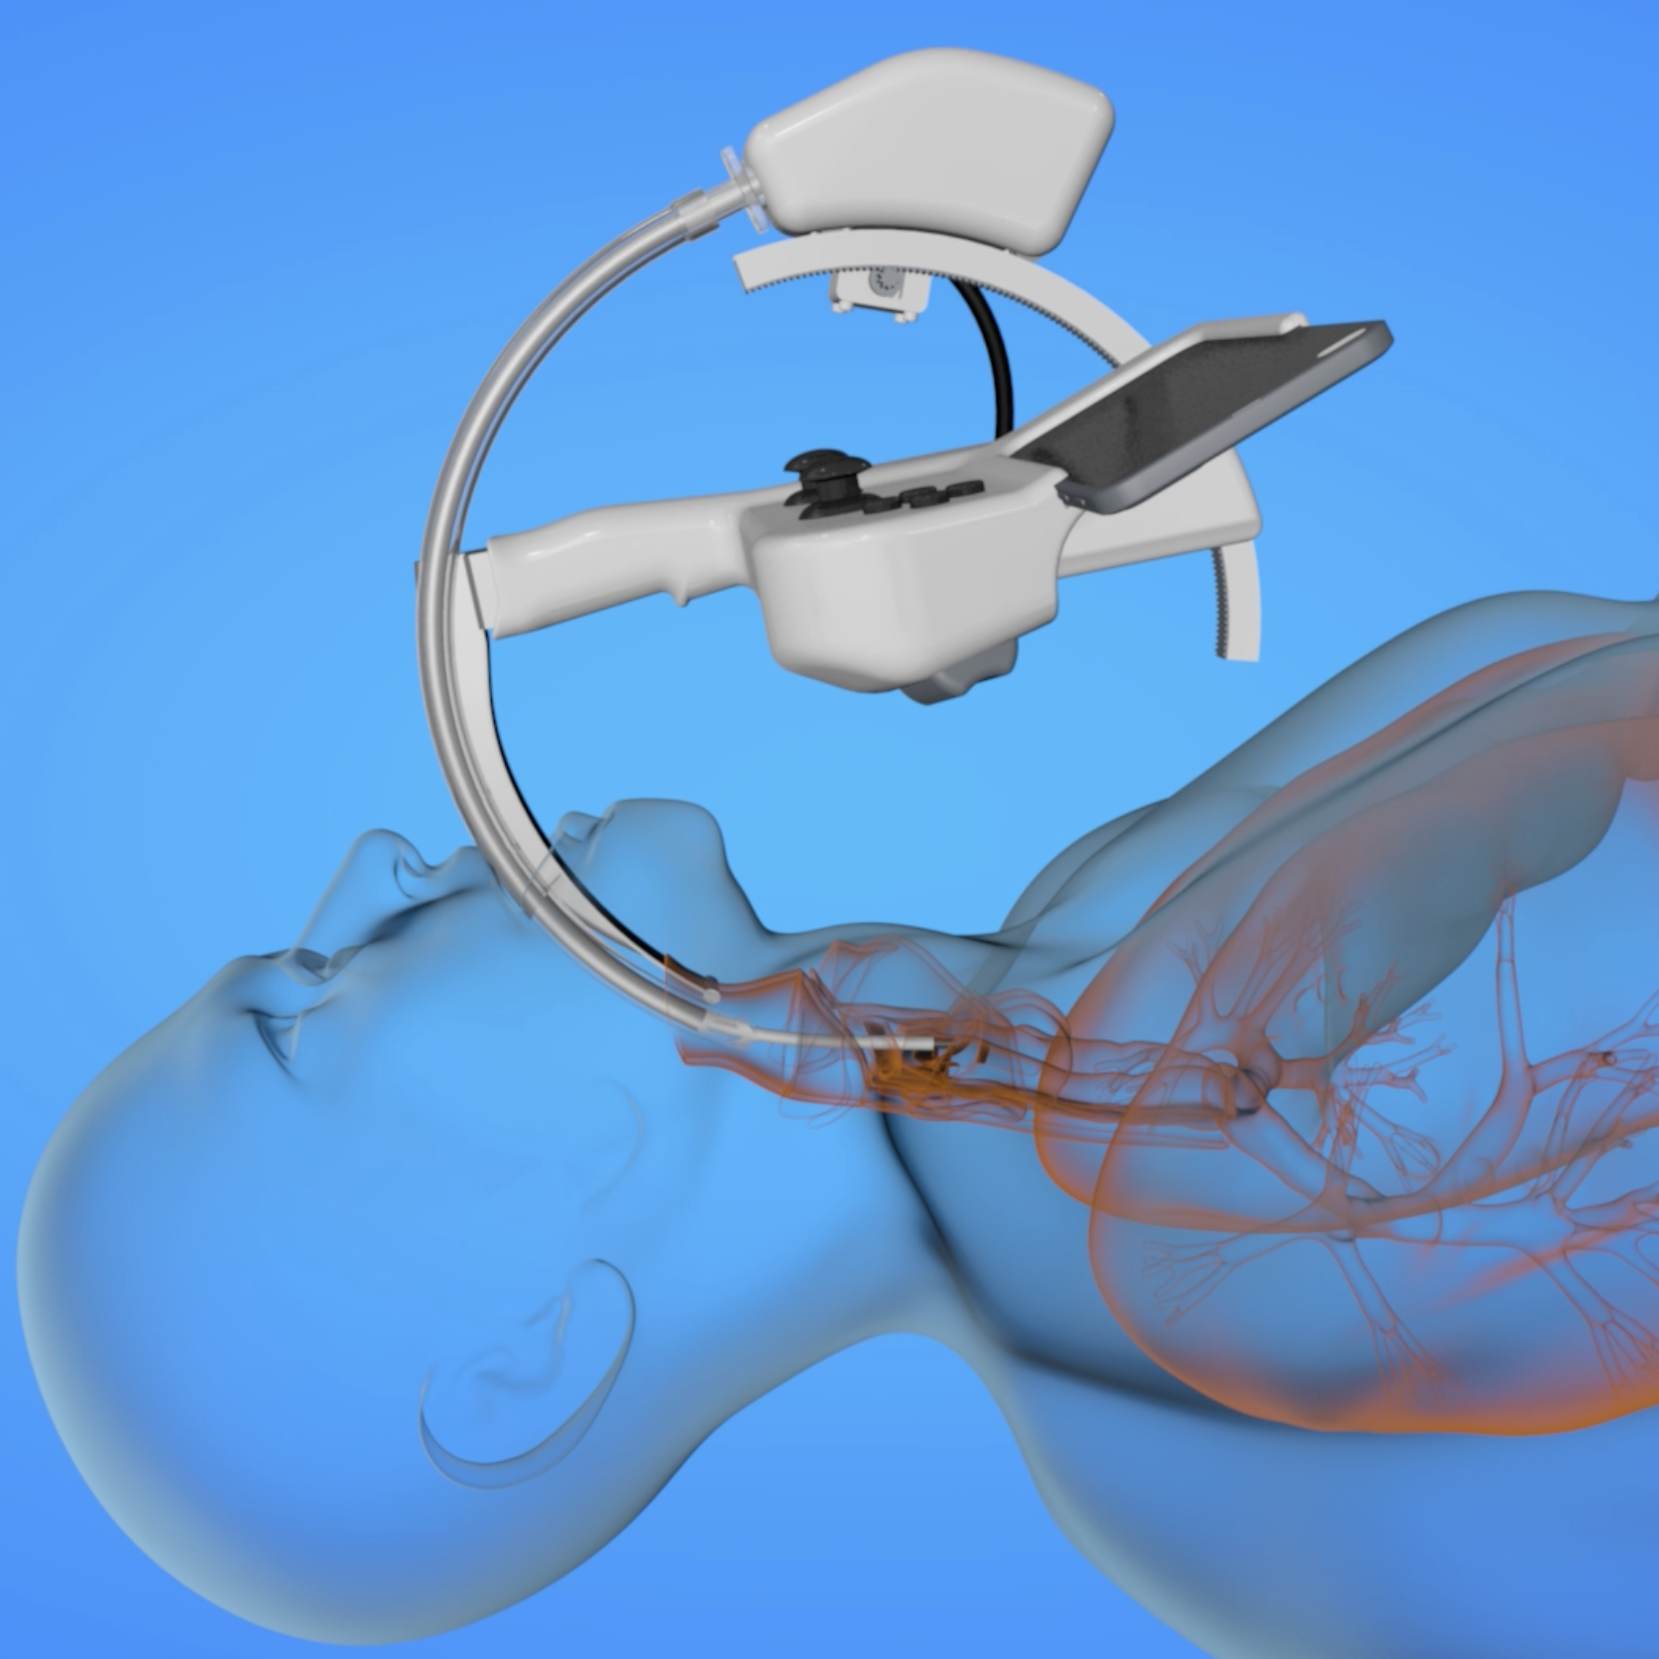 Enlarged view: Simulation of the endoscope with AI